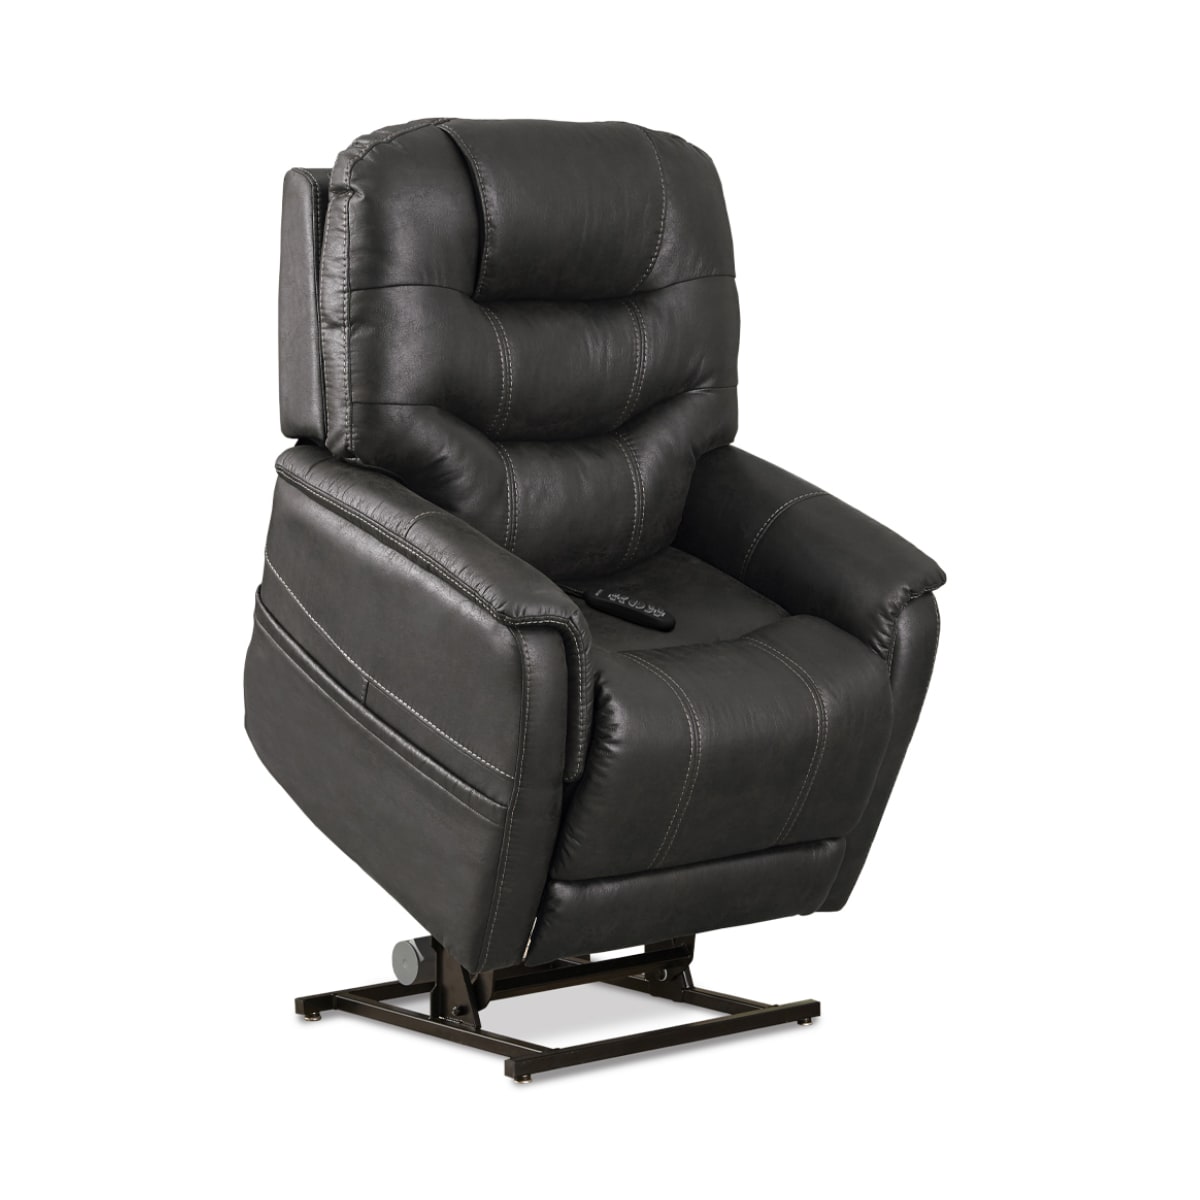 Prive VivaLift Elegance reclining lift chair in black leather, lifted position